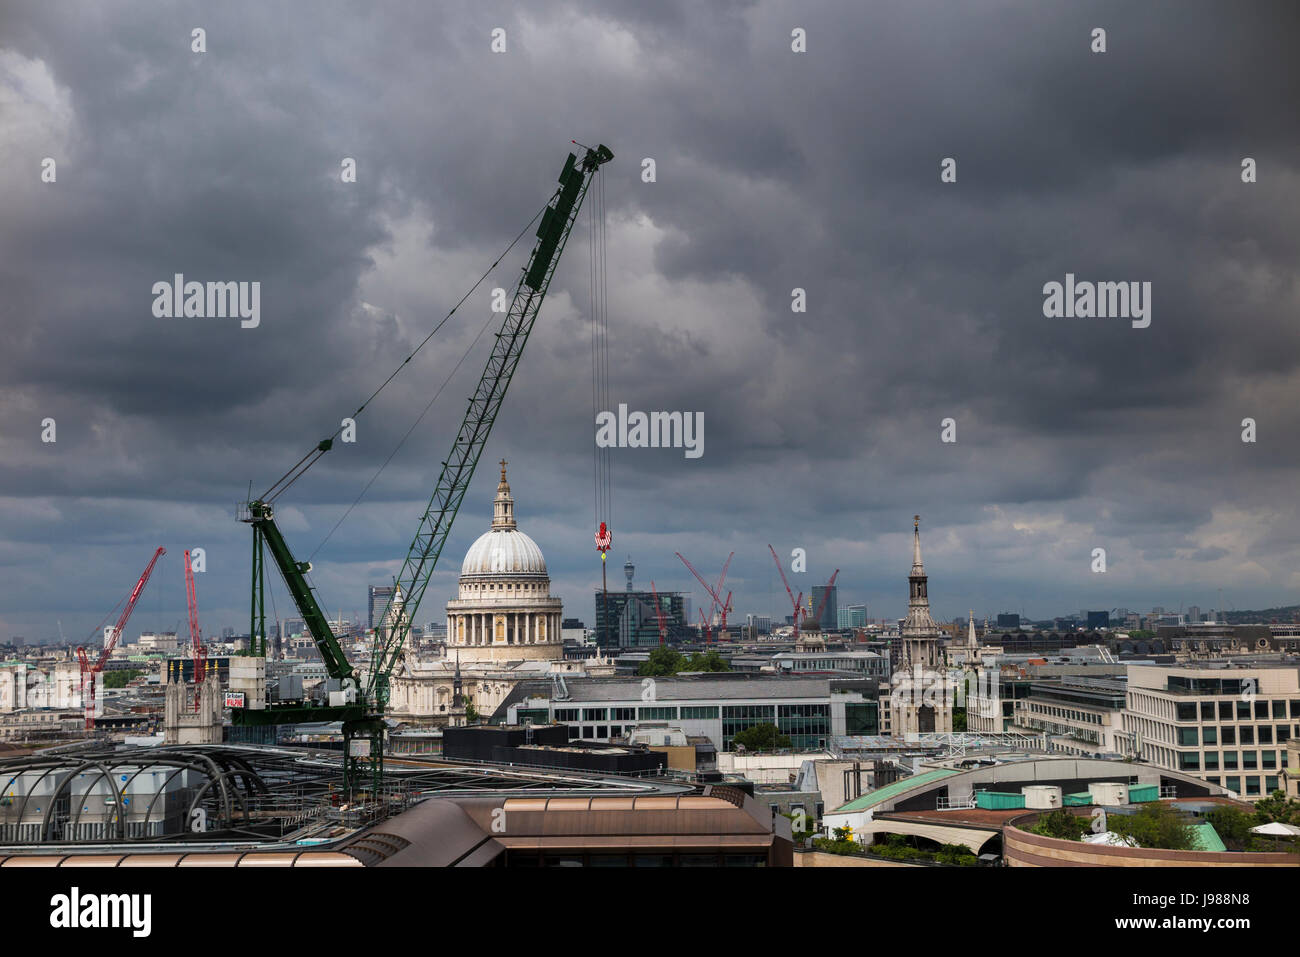 Tower cranes at the Bloomberg Place development site on the City of London skyline overlooking St Paul's Cathedral with grey gathering clouds Stock Photo